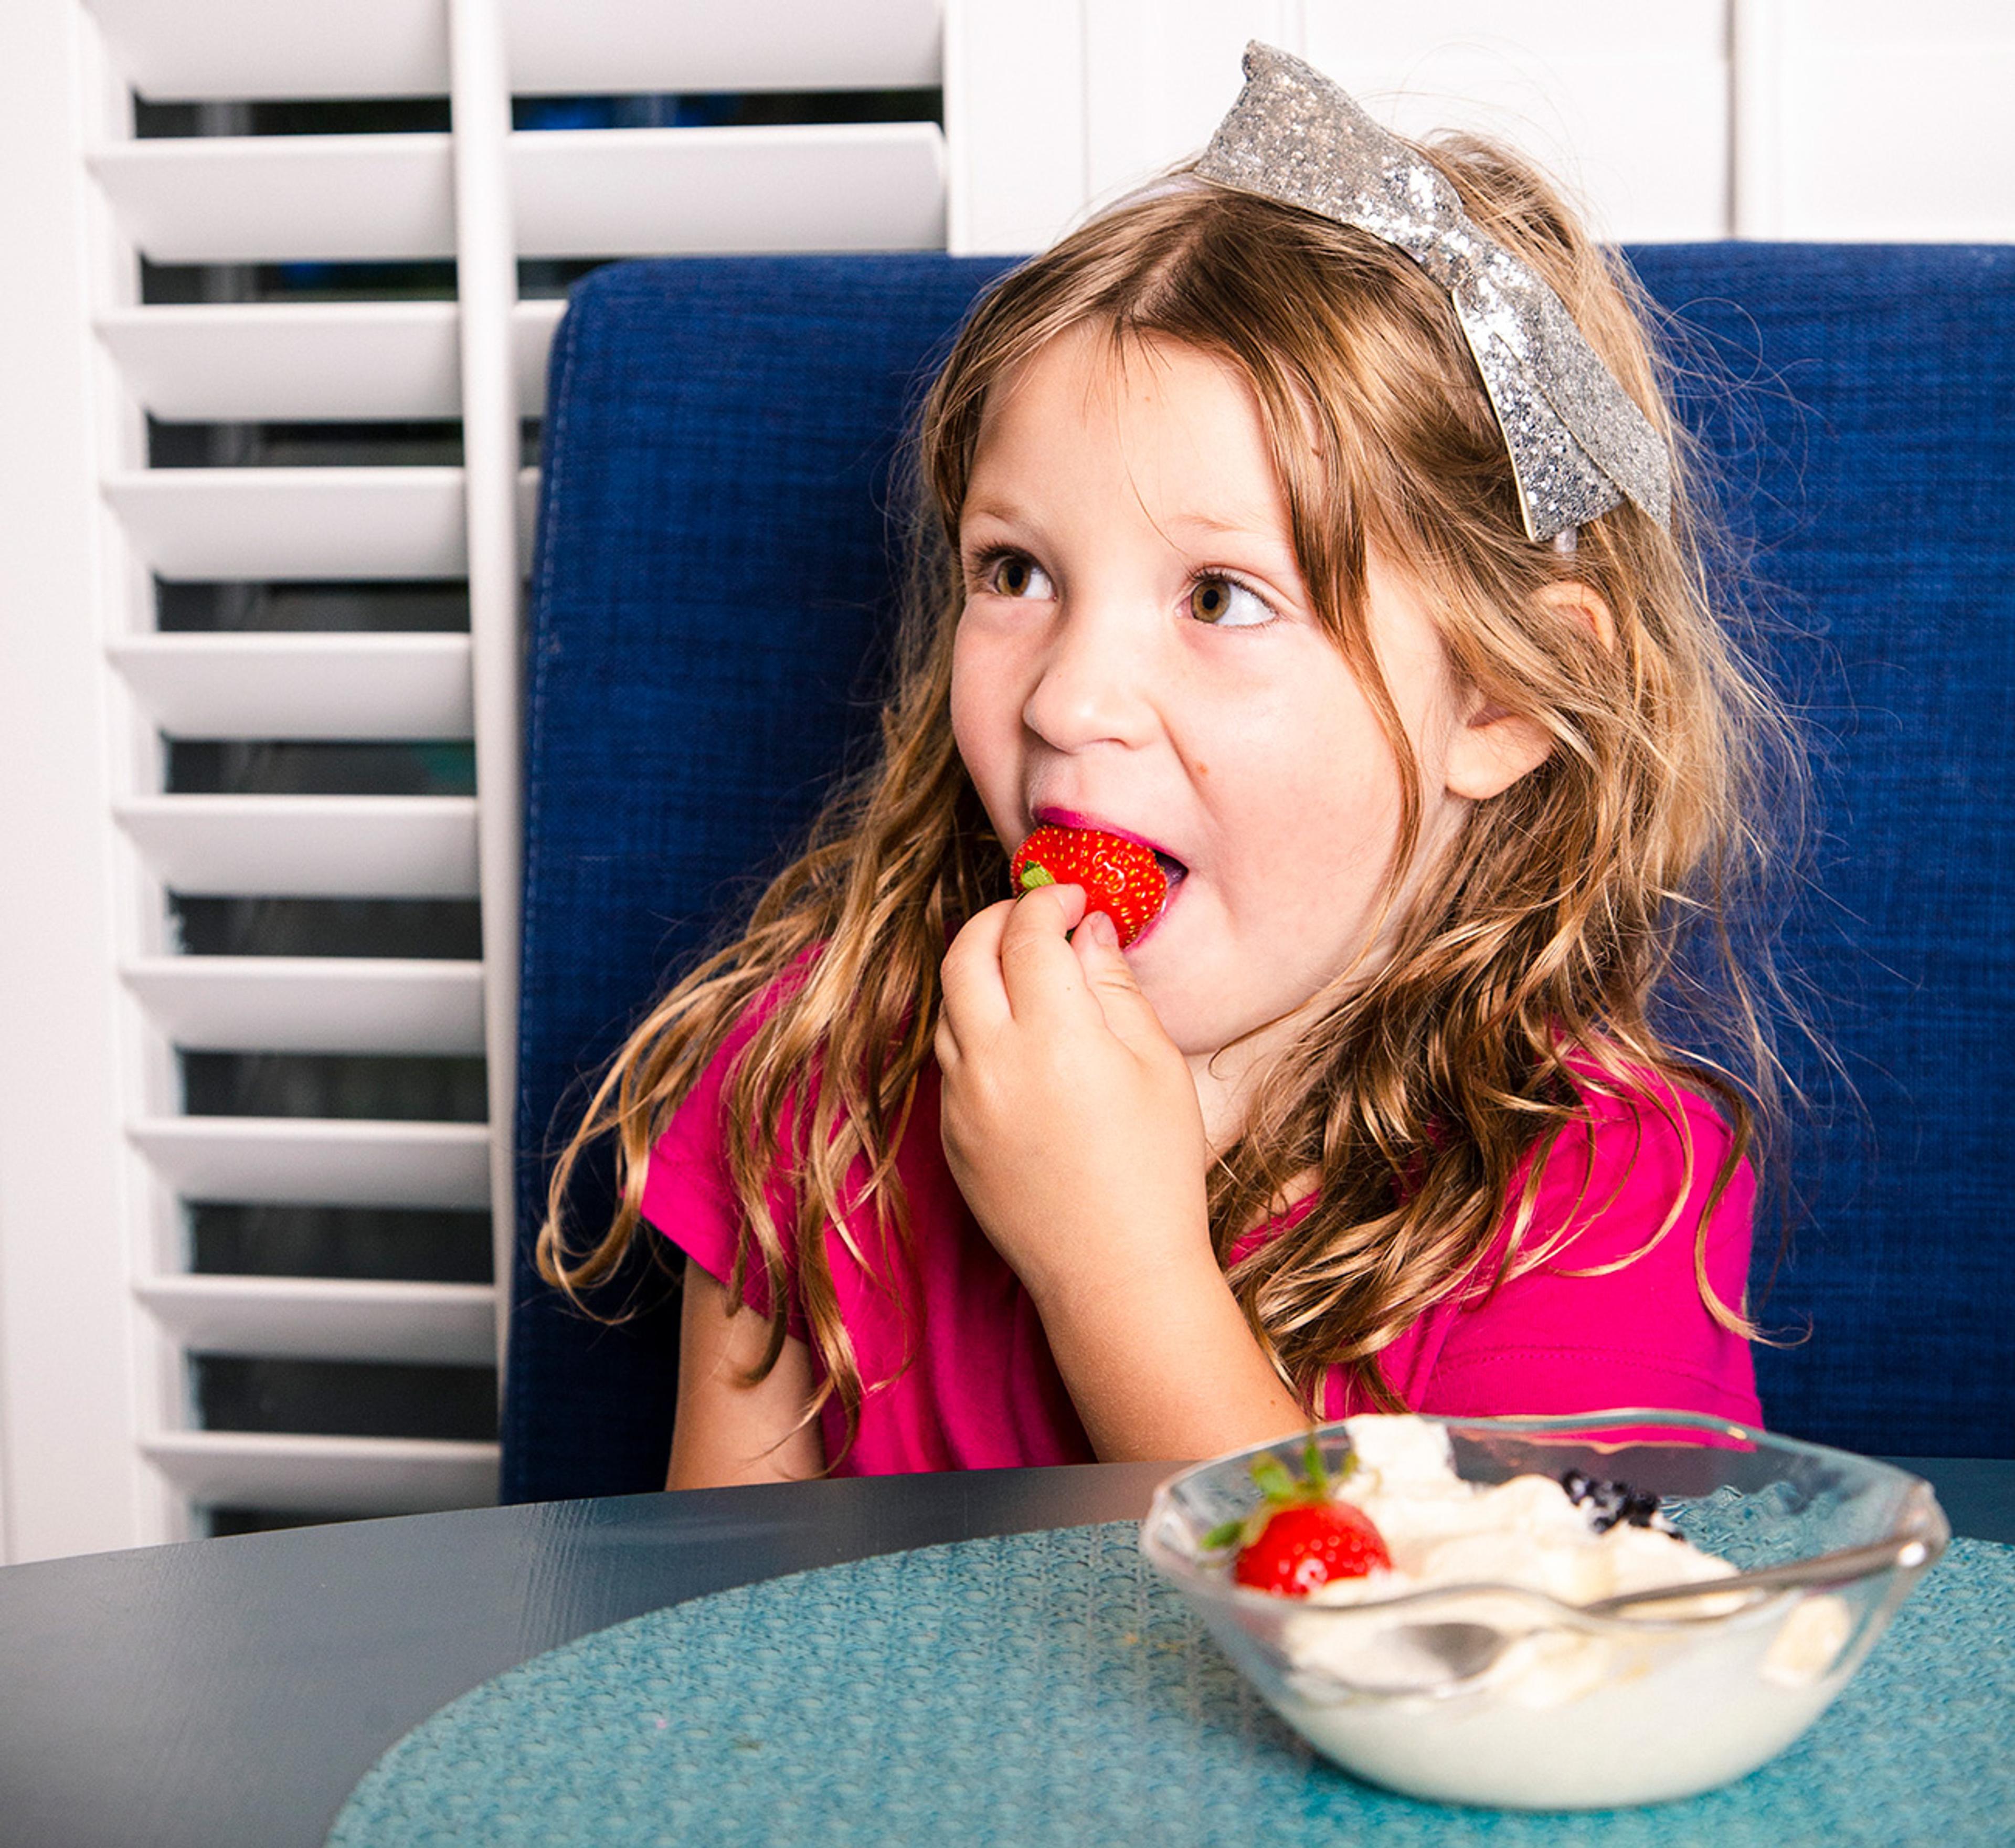 A young girl wearing a pink shirt eats a strawberry with whipped cream.